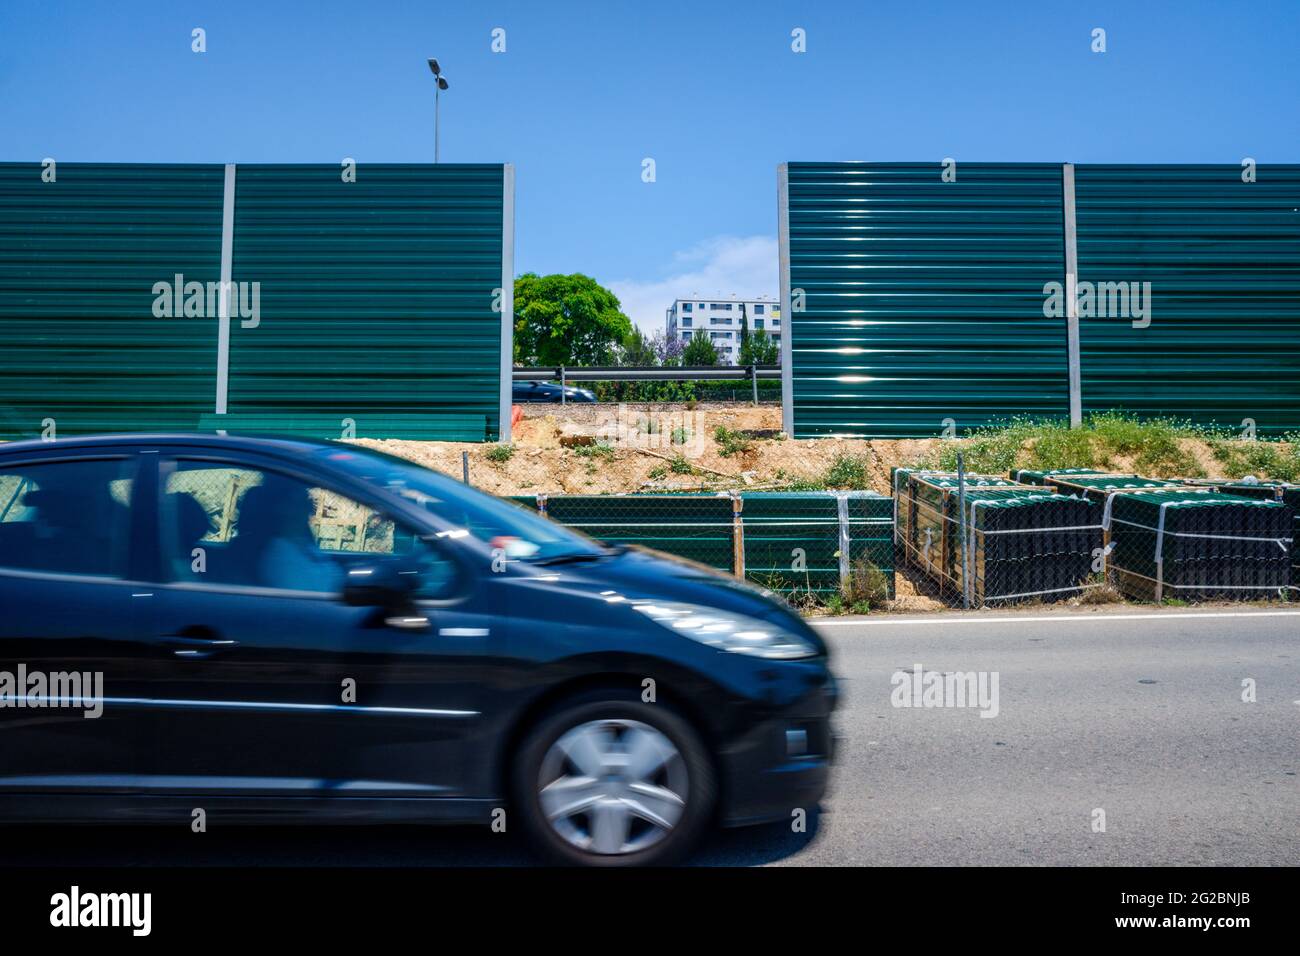 Valencia, Spain - June 9, 2021: Construction material next to a noisy road to isolate nearby homes from noise. Stock Photo